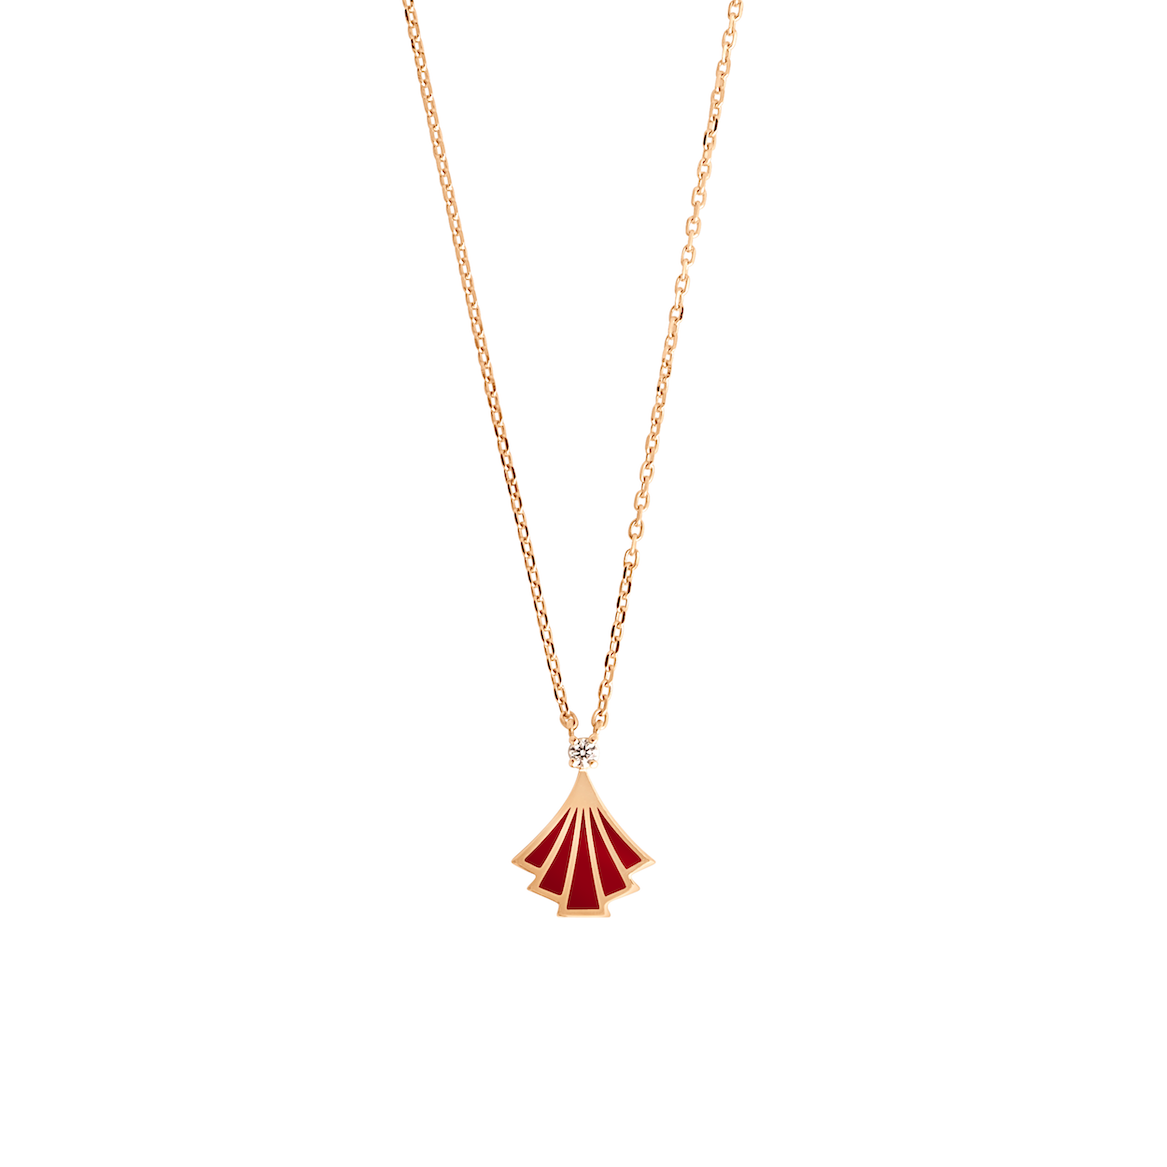 Bloom Necklace - Lilly White